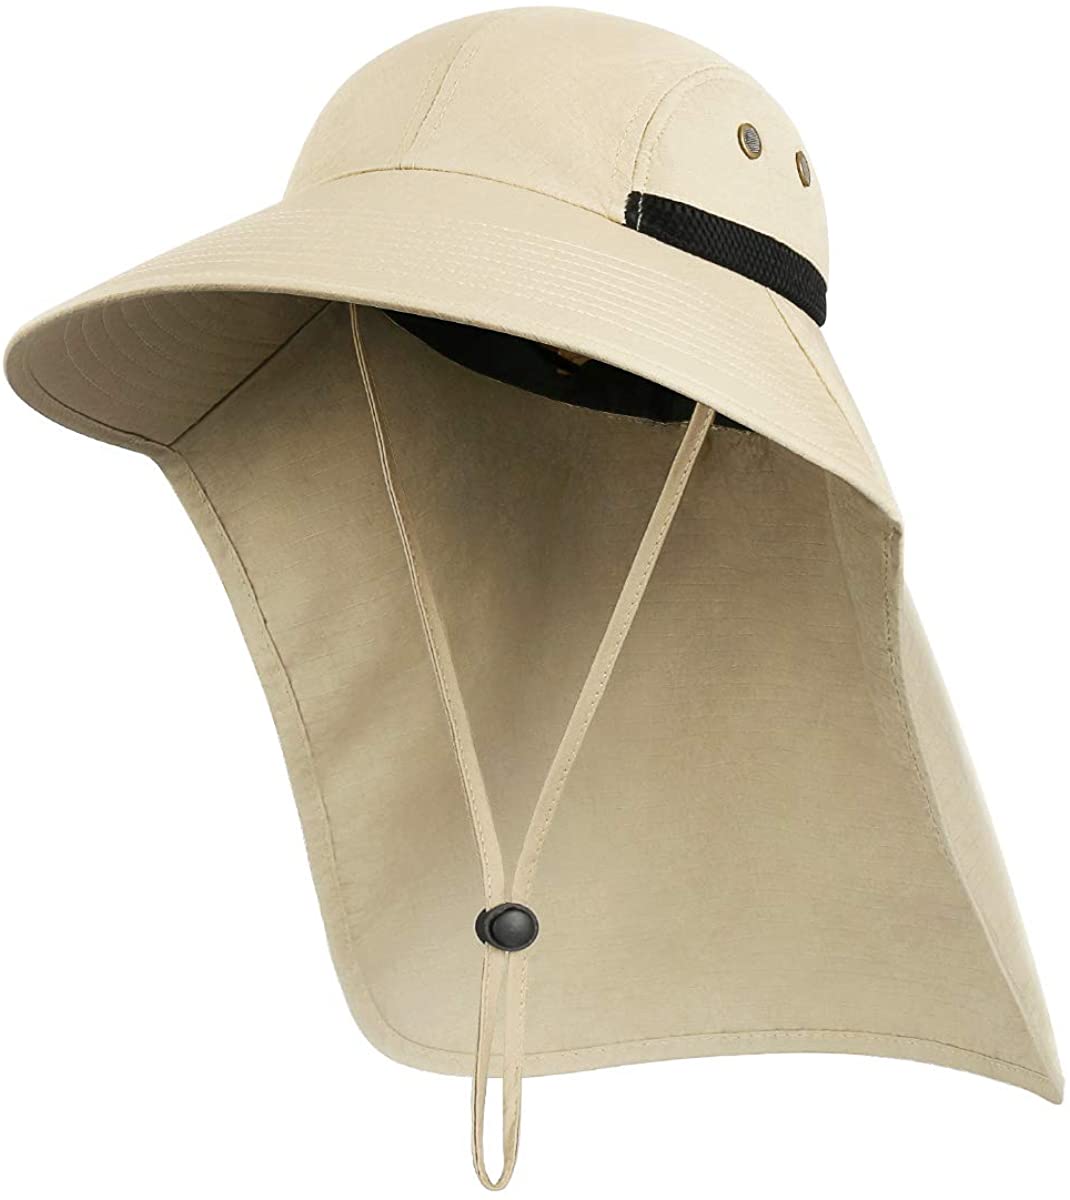 Outdoor Sun Hat for Men with 50+ UPF Protection Safari Cap Wide Brim Fishing  Hat